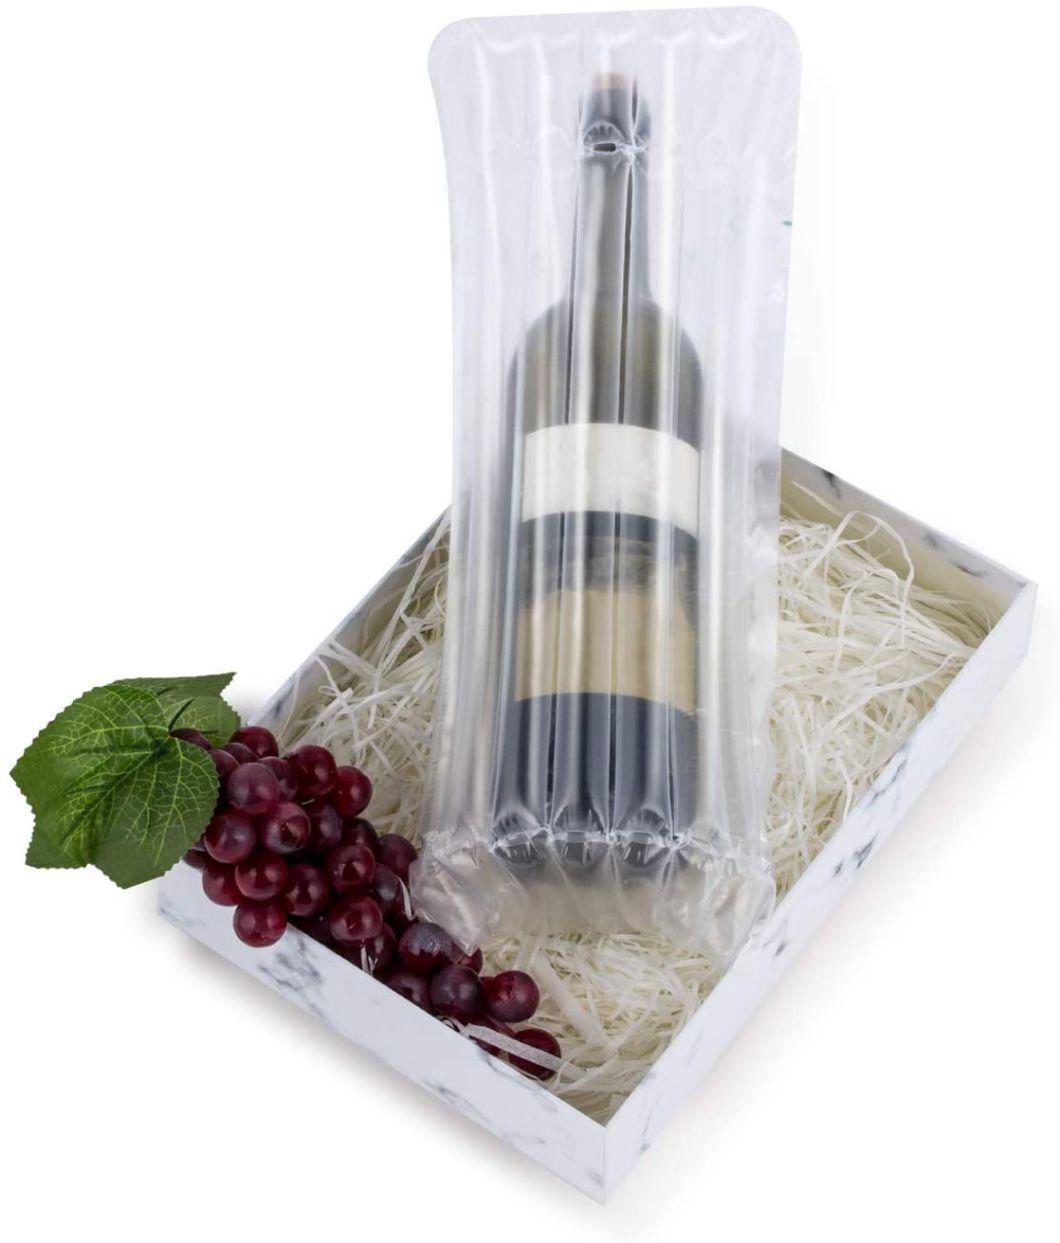 Wine Bottle Protector Gas Column Wrap Bags Sleeves Glass Travel Transport Air Filled Column Leakproof Cushioning